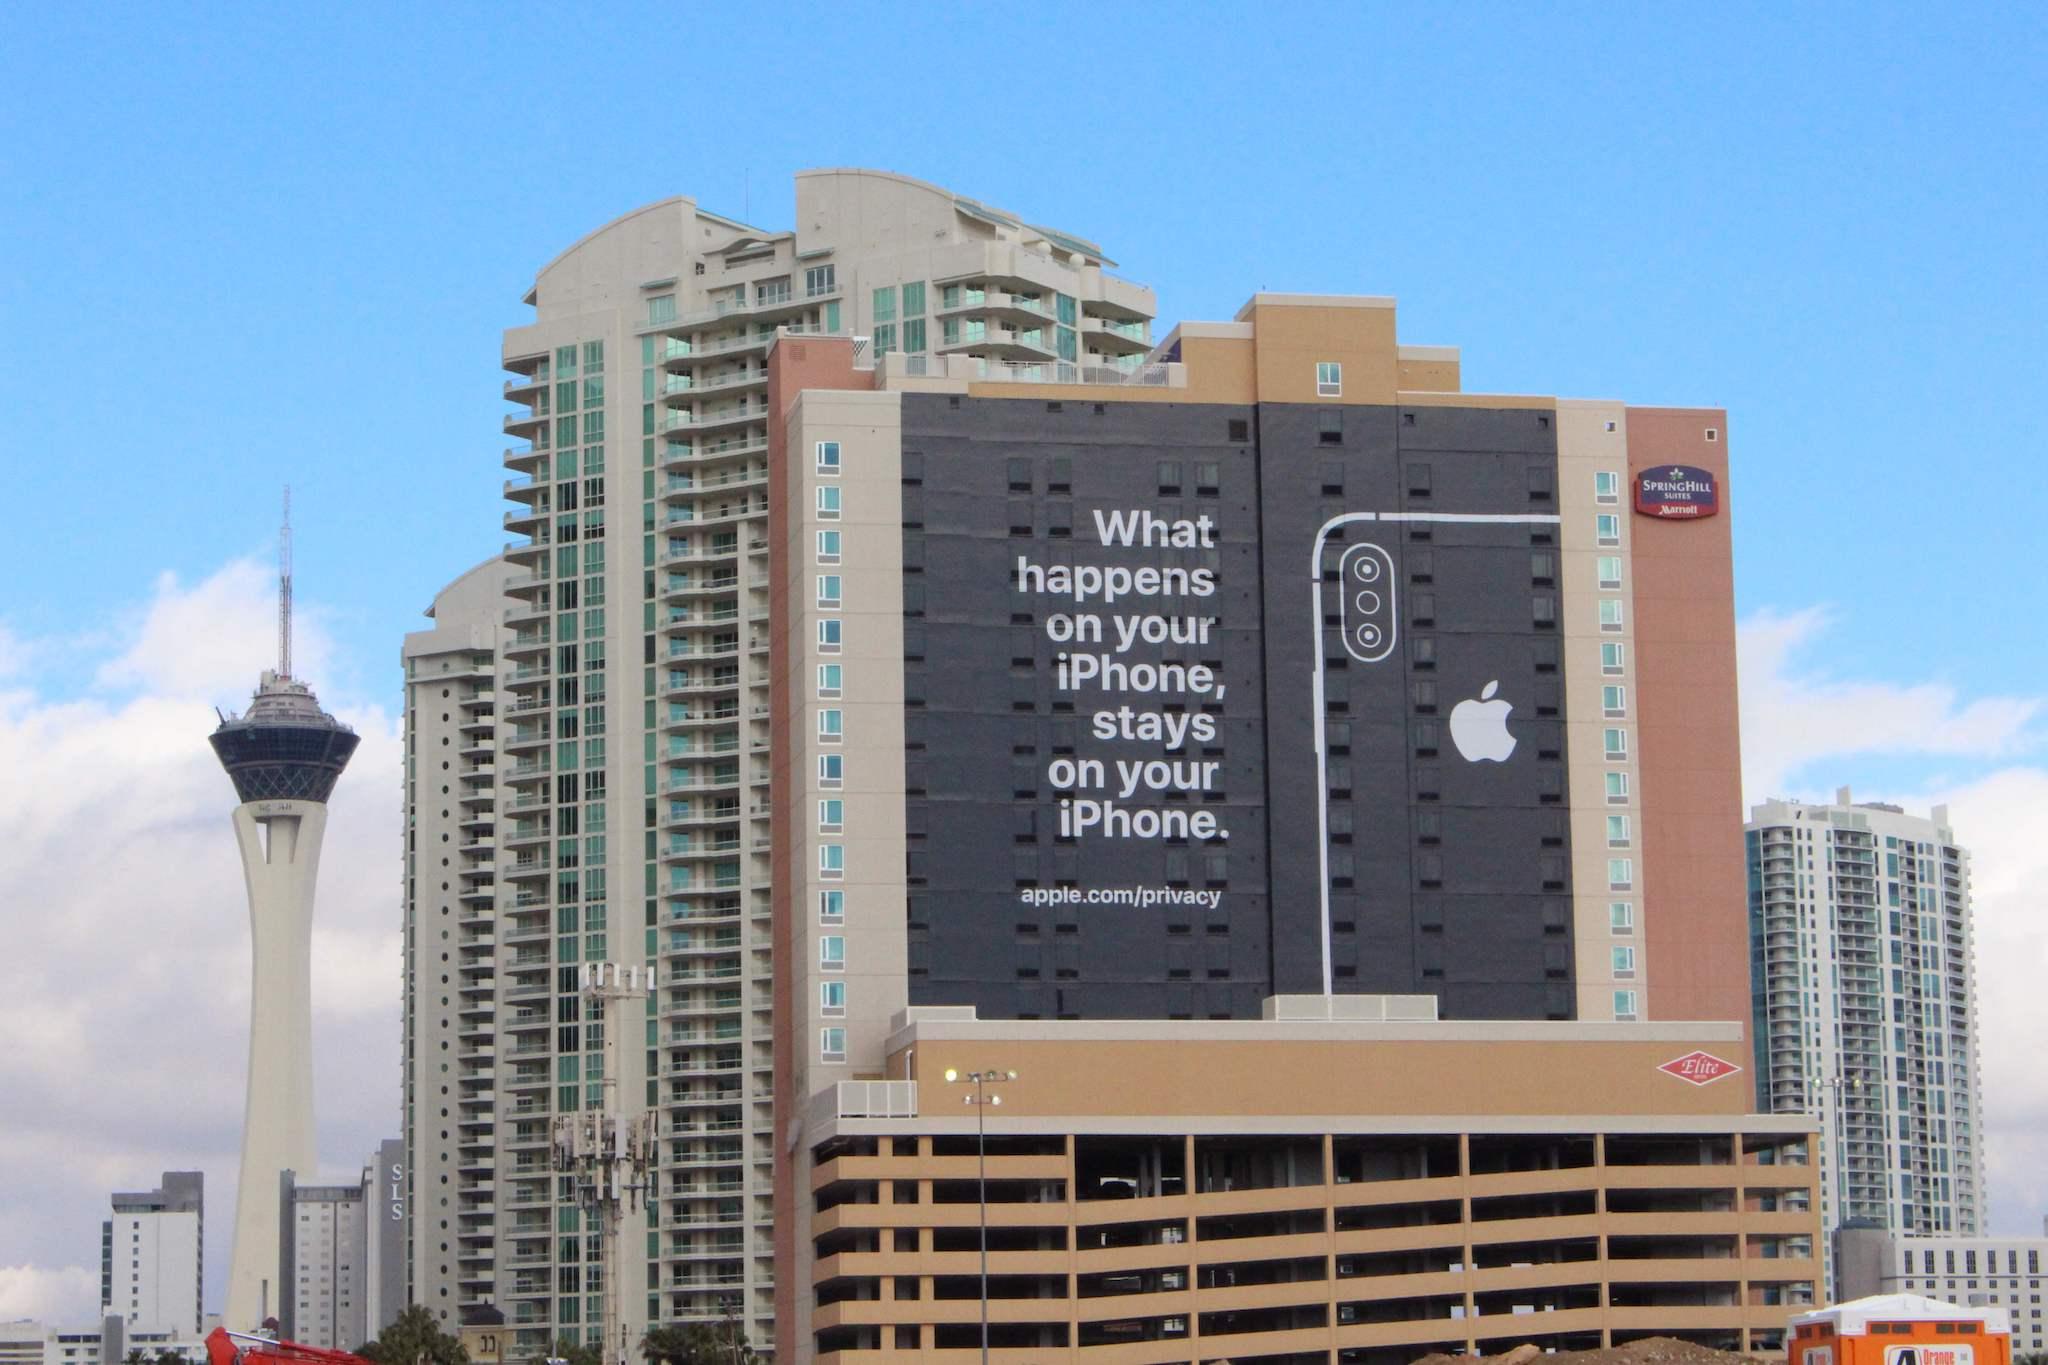 A view of buildings in the distance as Apple takes a shot at rivals such as Google on the data privacy front at the major Consumer Electronics Show in Las Vegas, on January 6, 2019, with a message on the side of a hotel playing off Sin City, "What happens in Vegas stays in Vegas"